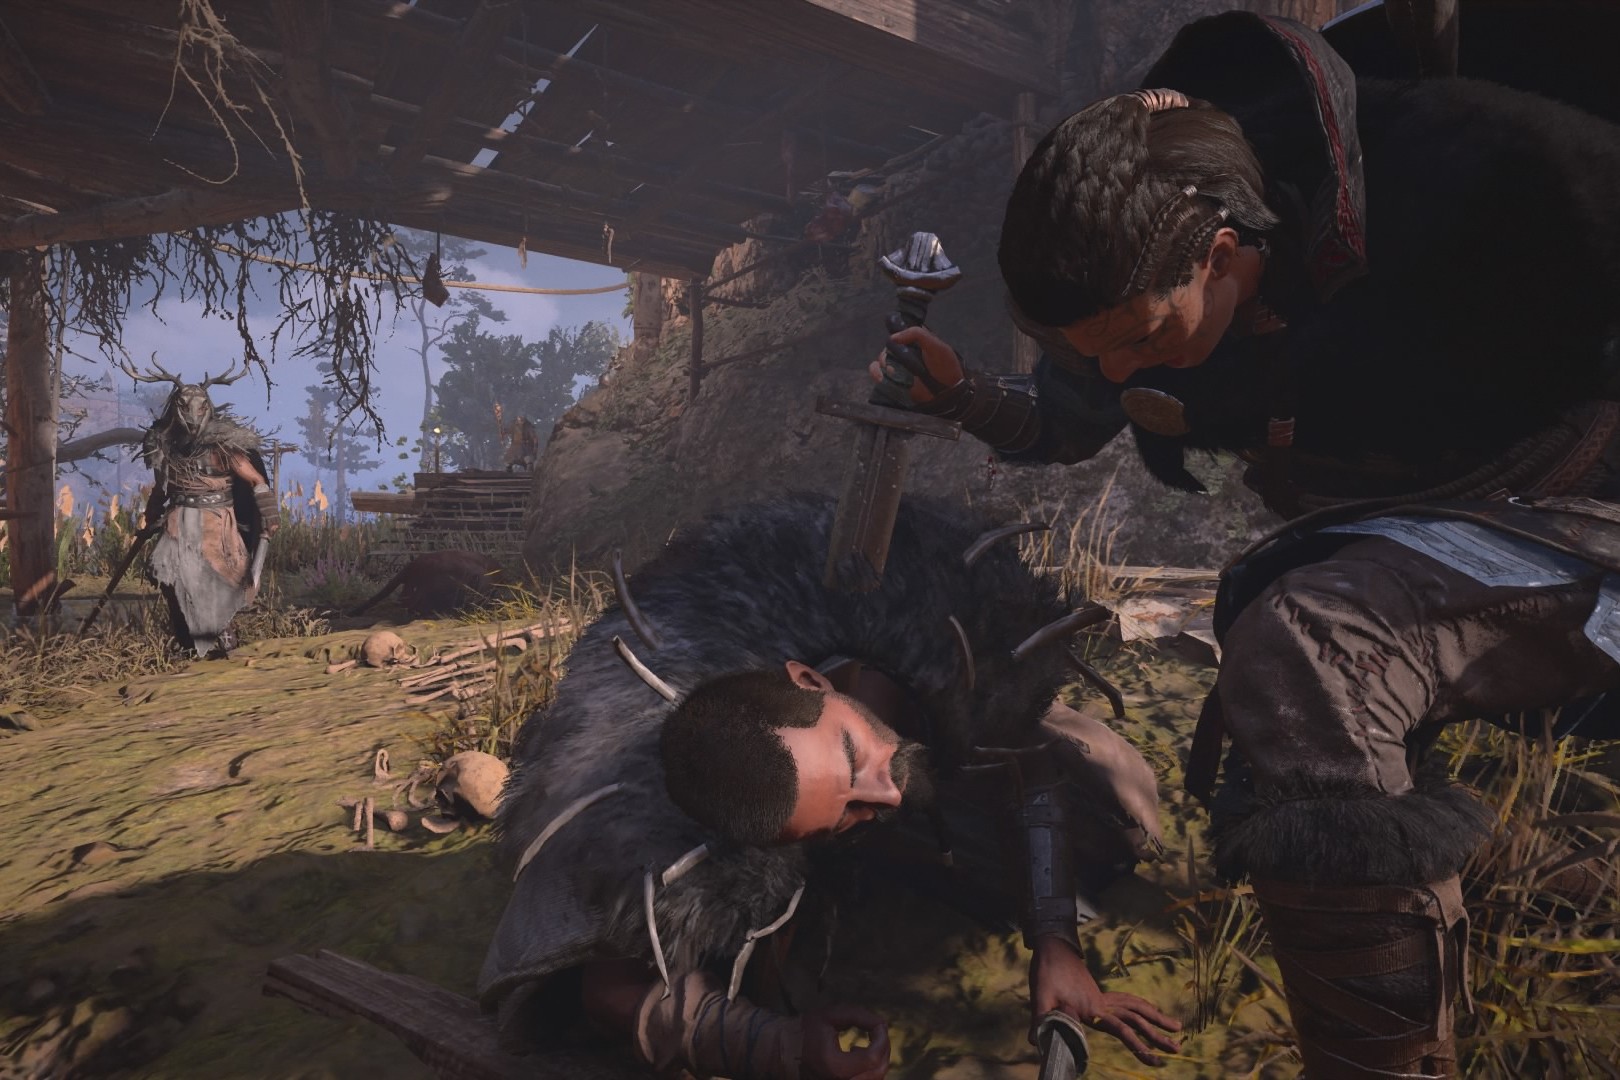 Raiding, Drinking, and Stomping in Assassin's Creed Valhalla